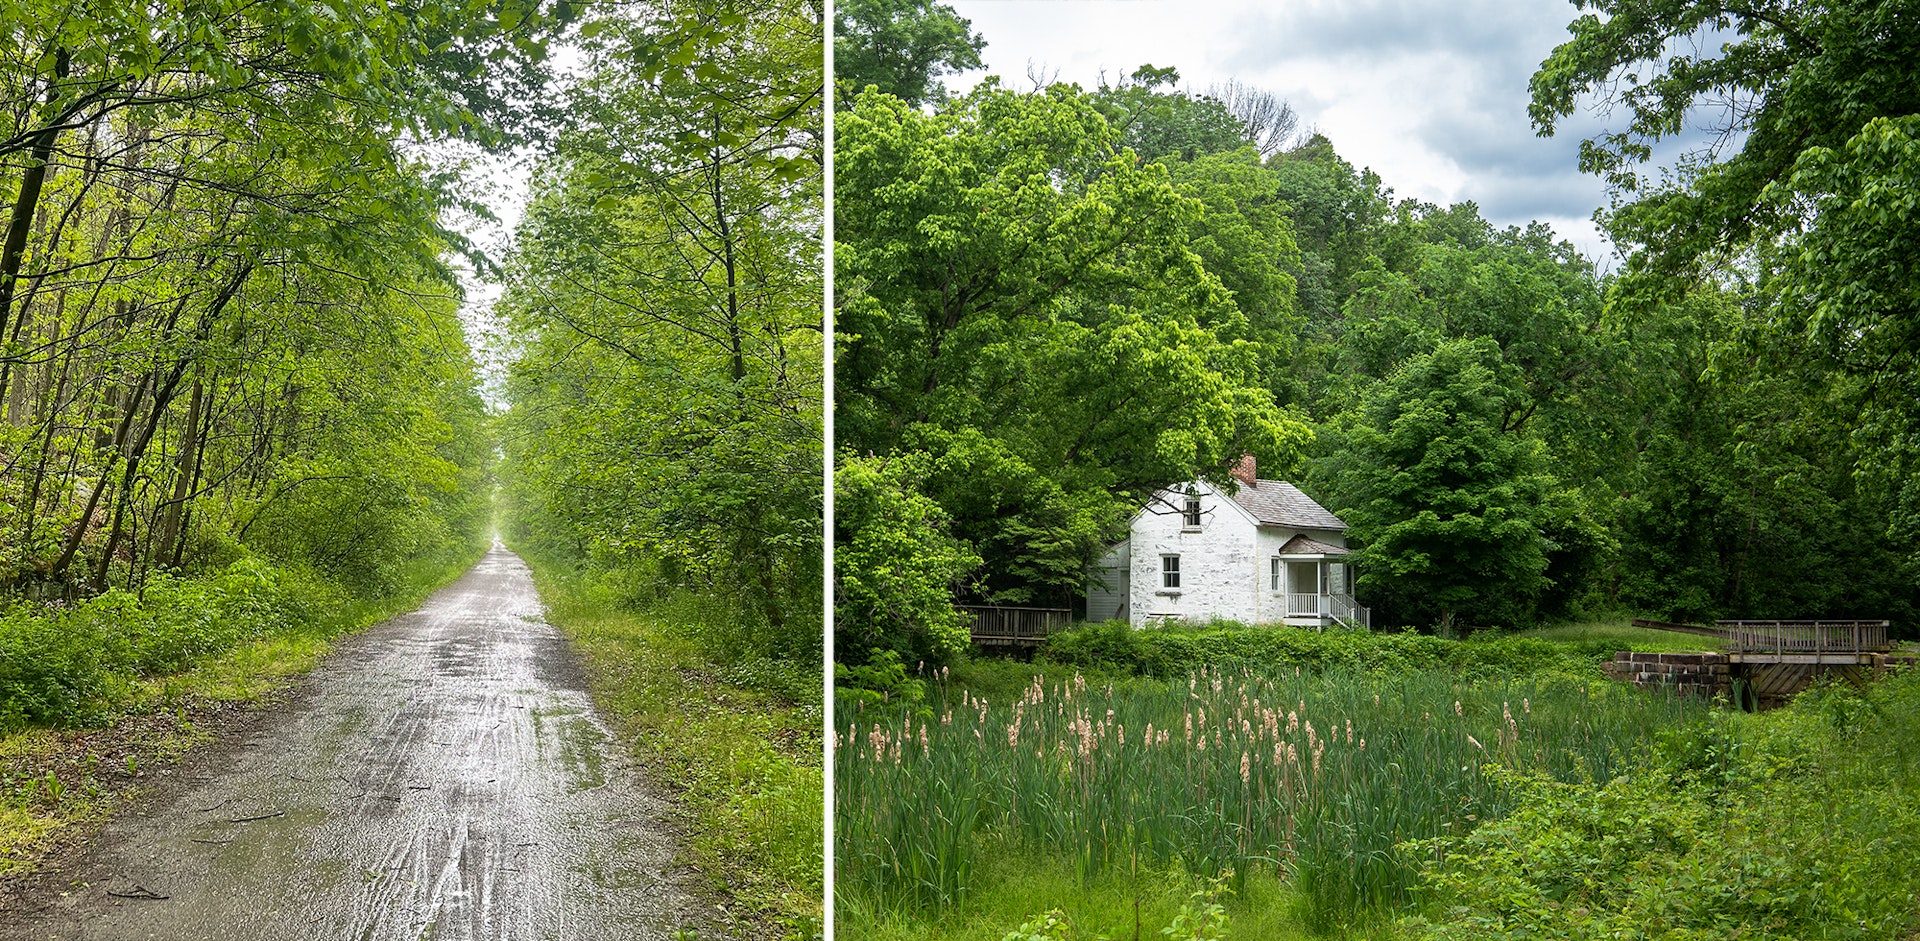 LEFT: Muddy path in the rain; RIGHT: Canal house on towpath